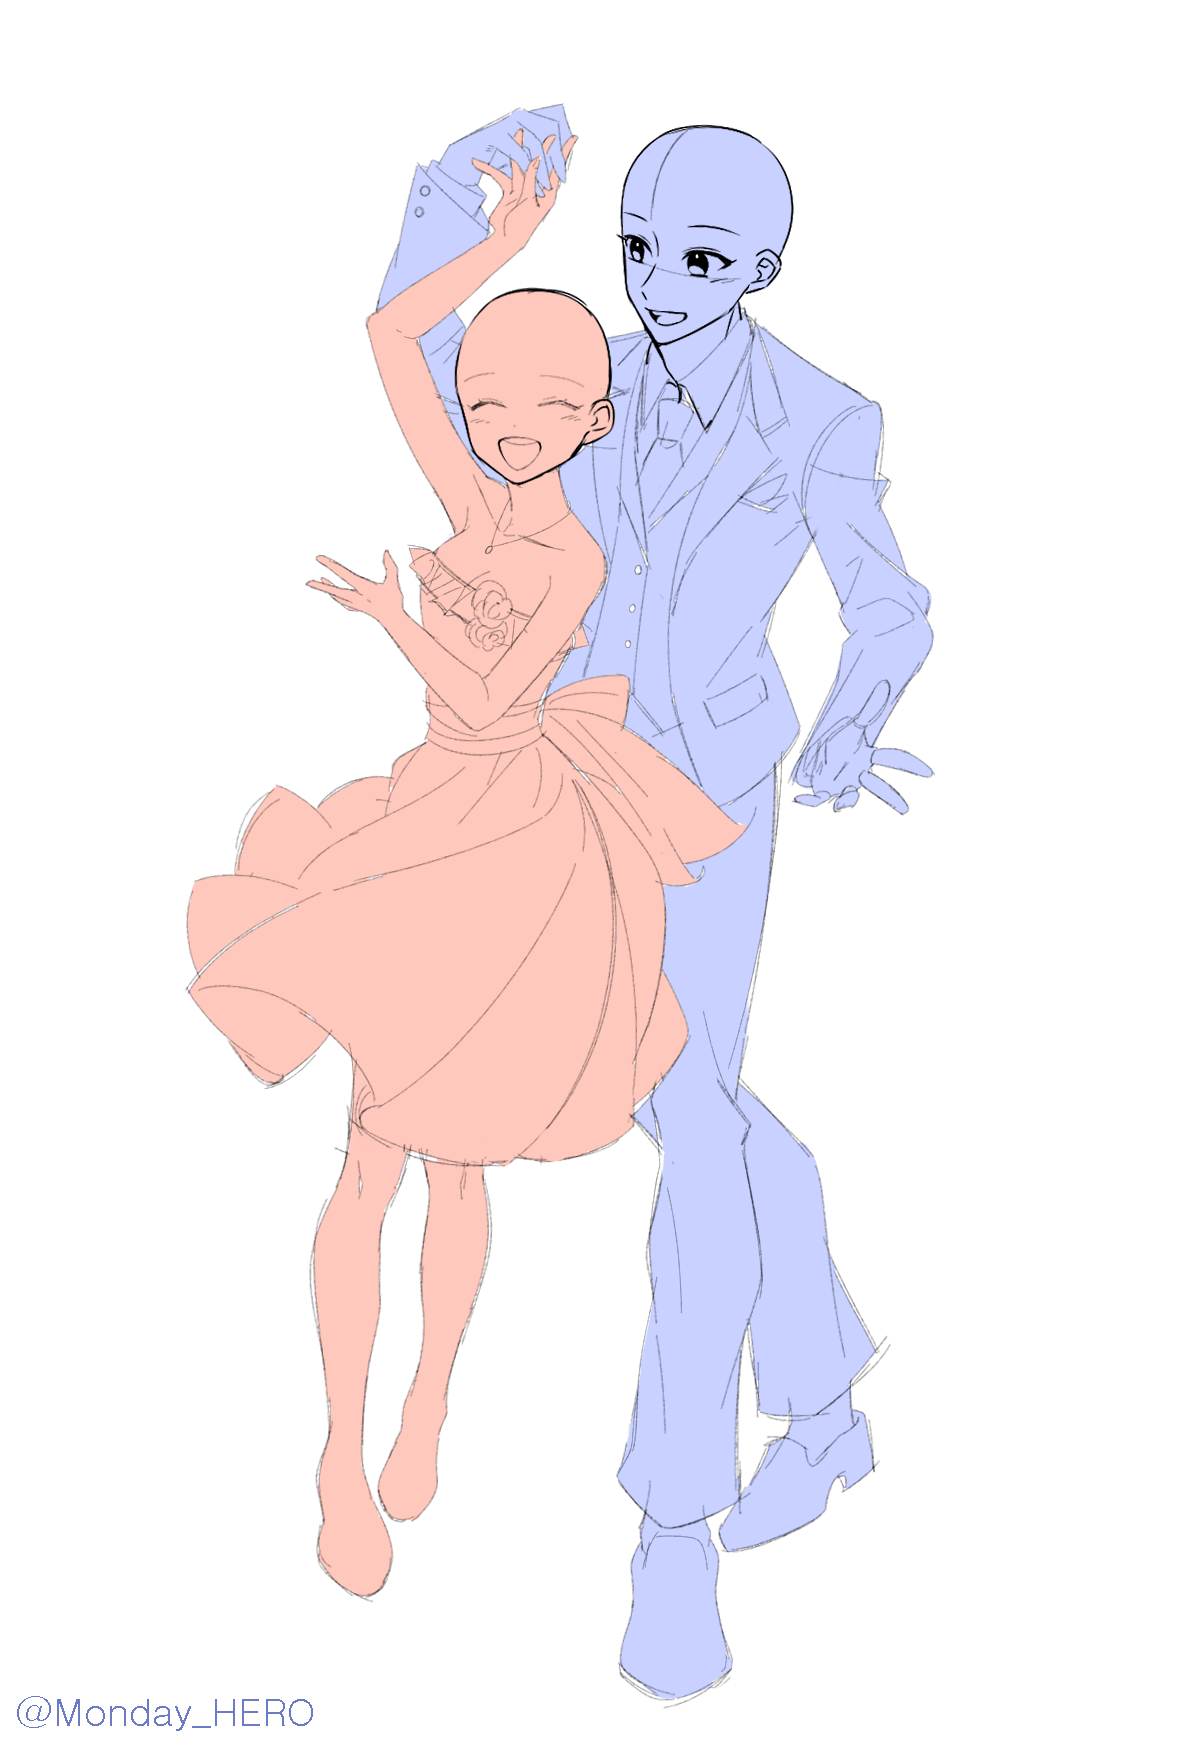 Couple Dancing Pose Reference Drawing & Sketch Collection for Artists